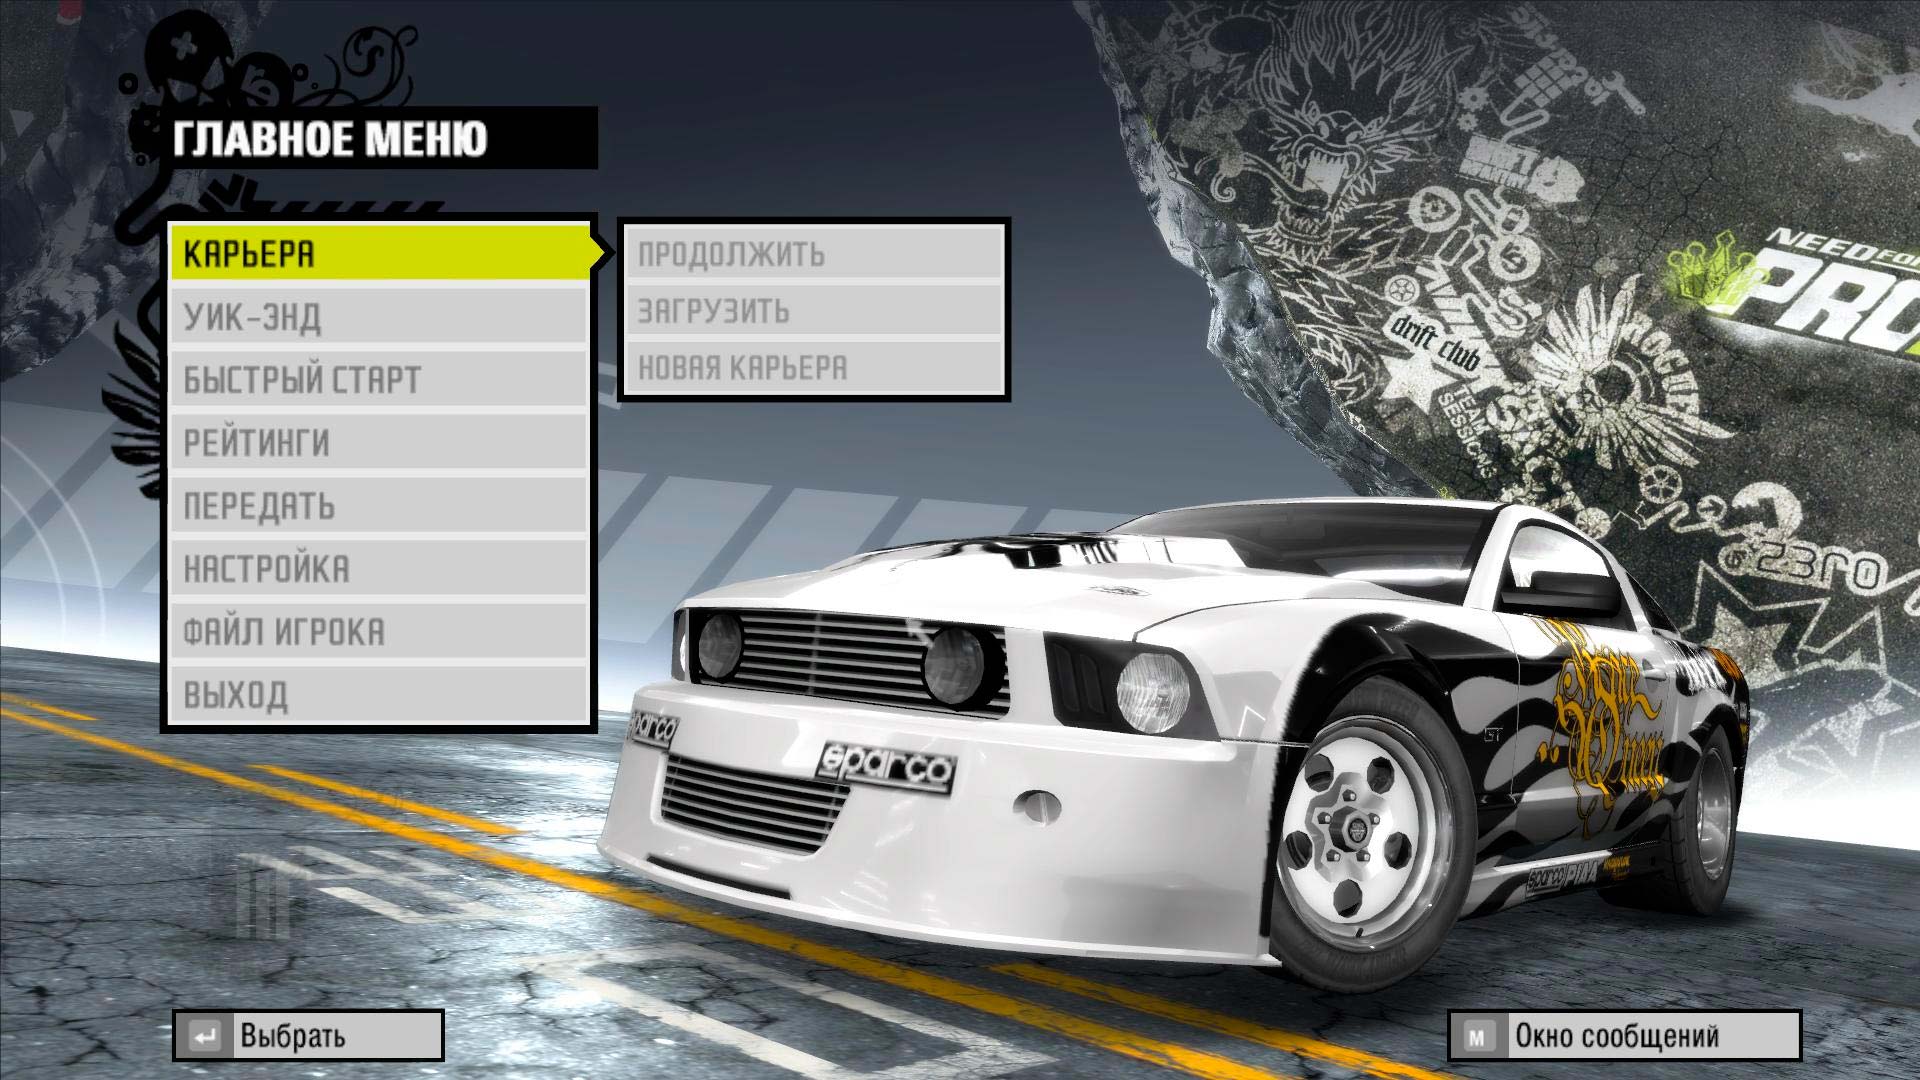 Speed main. Need for Speed: PROSTREET. Need for Speed меню. Need for Speed прострит. Игра на ПК need for Speed PROSTREET.